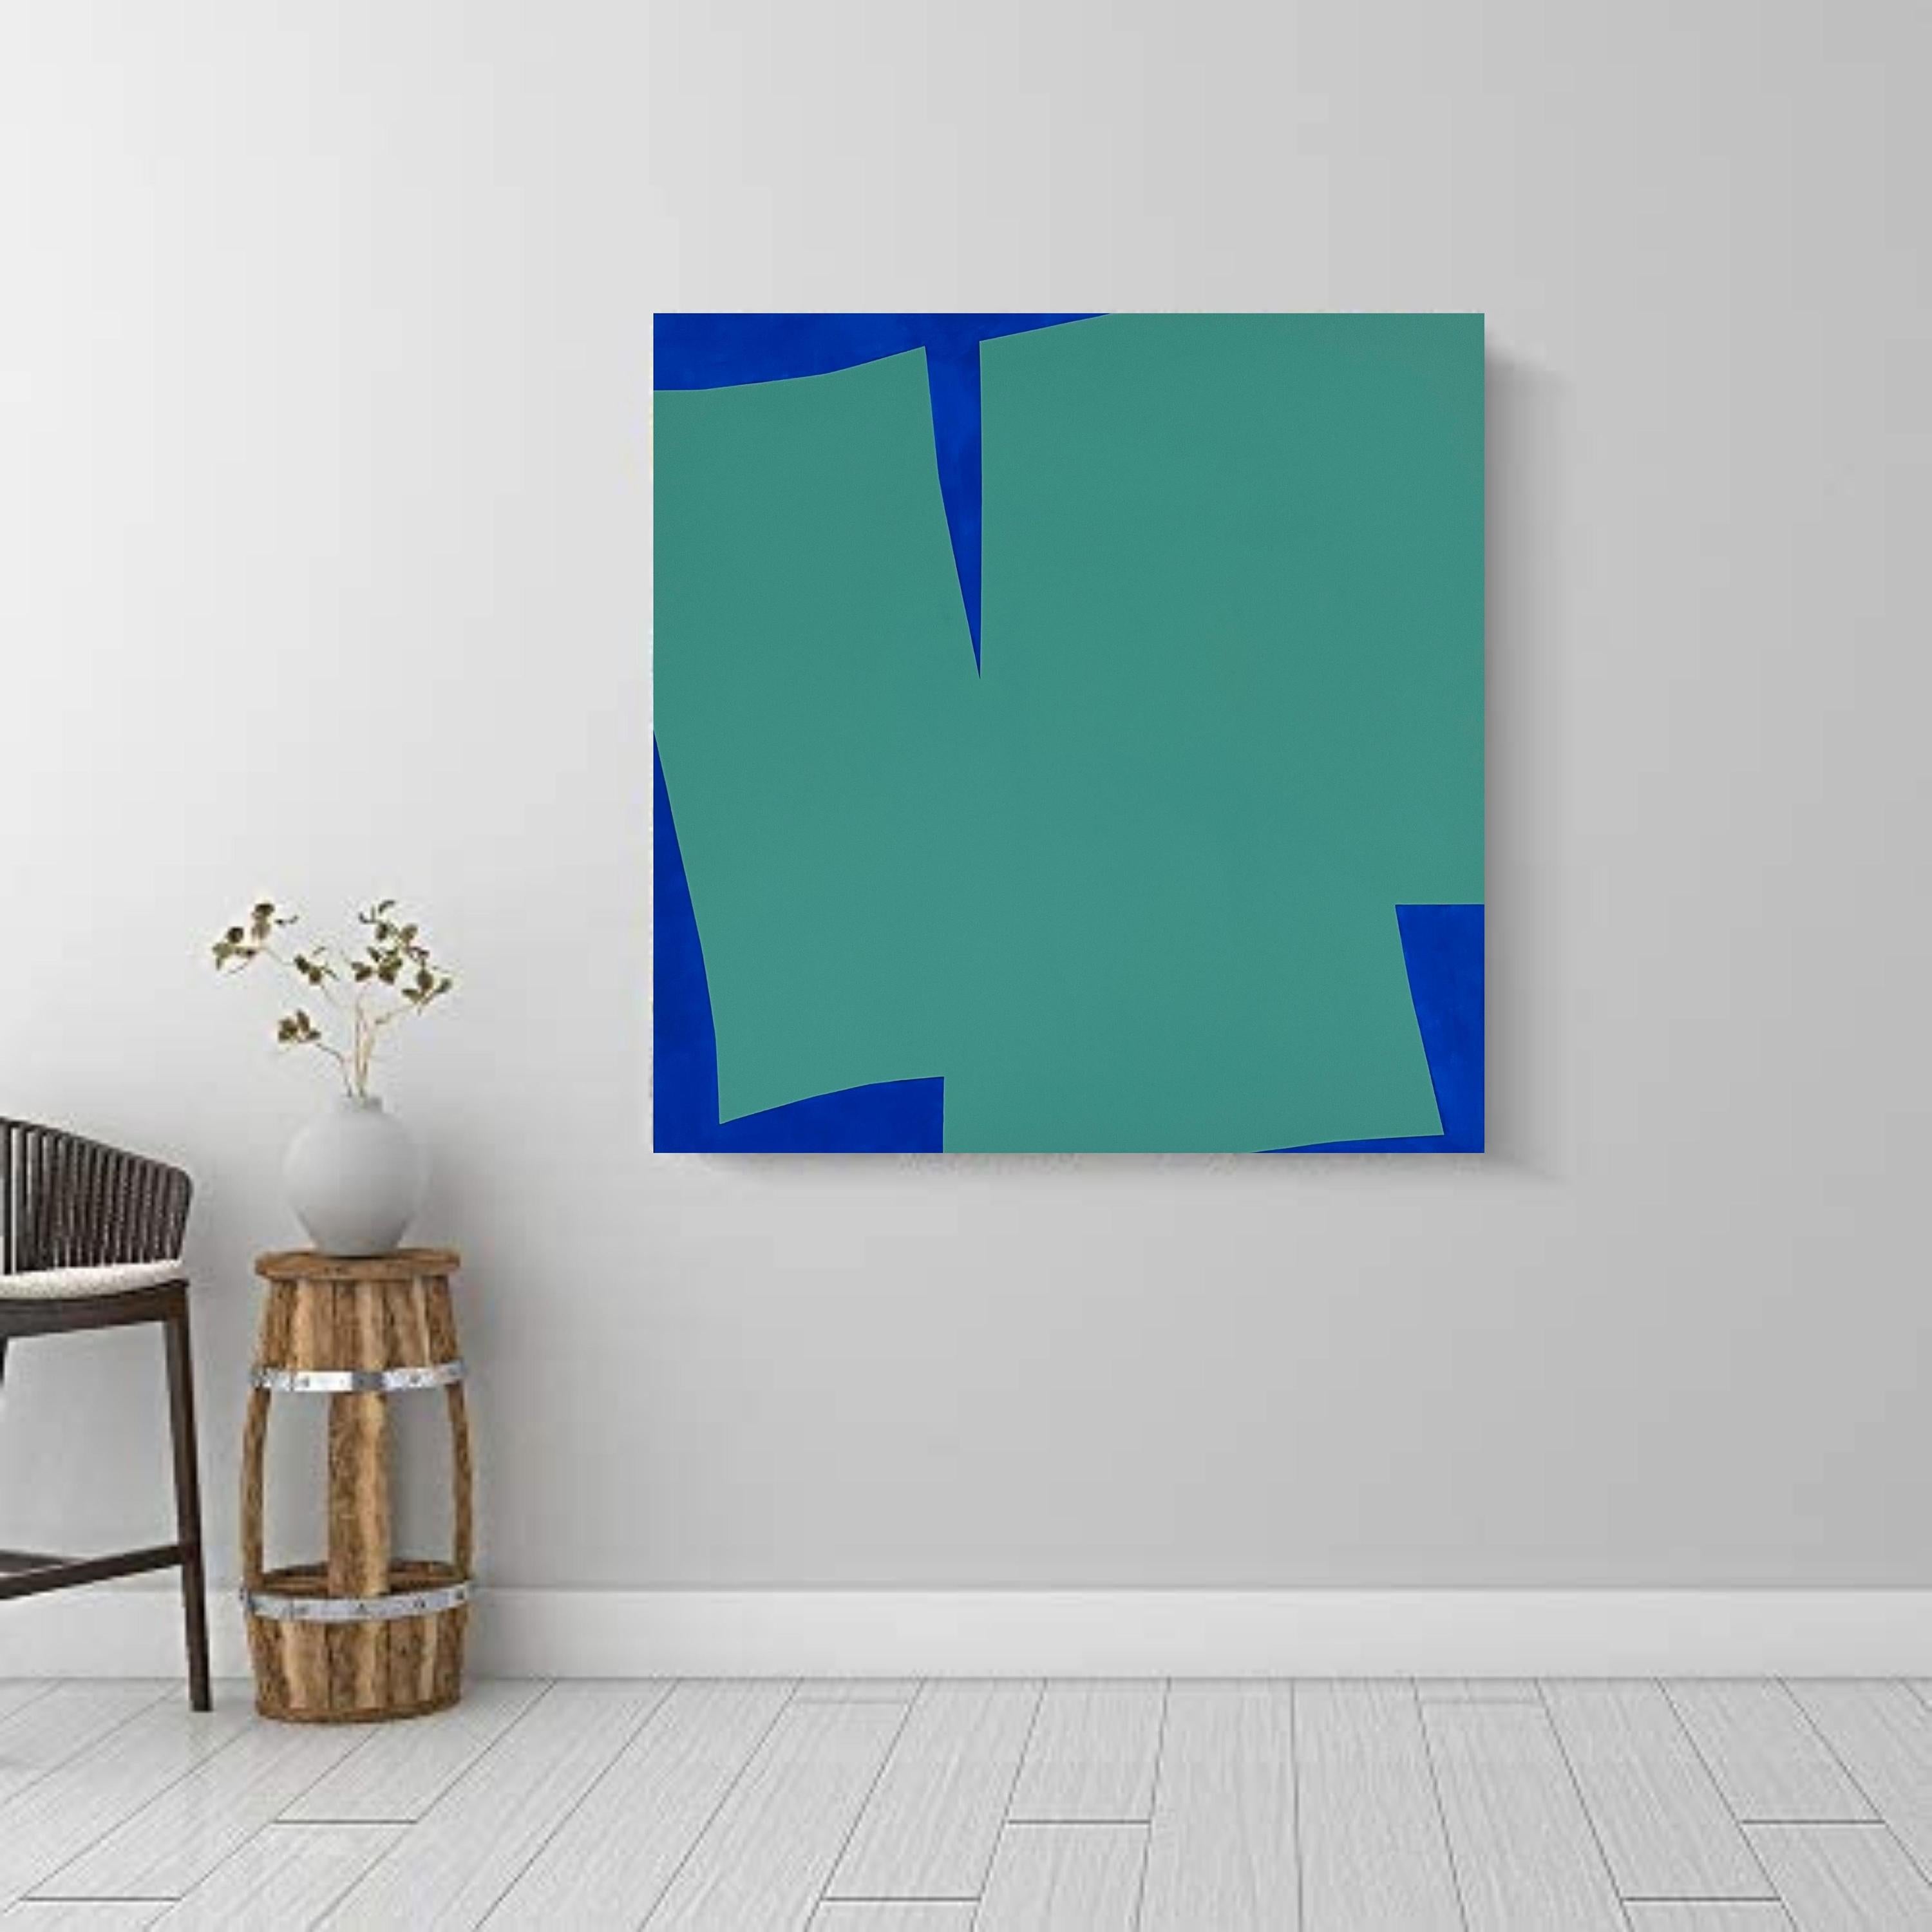 Geoforms Green & Blue - Abstract Painting by Anna Medvedeva